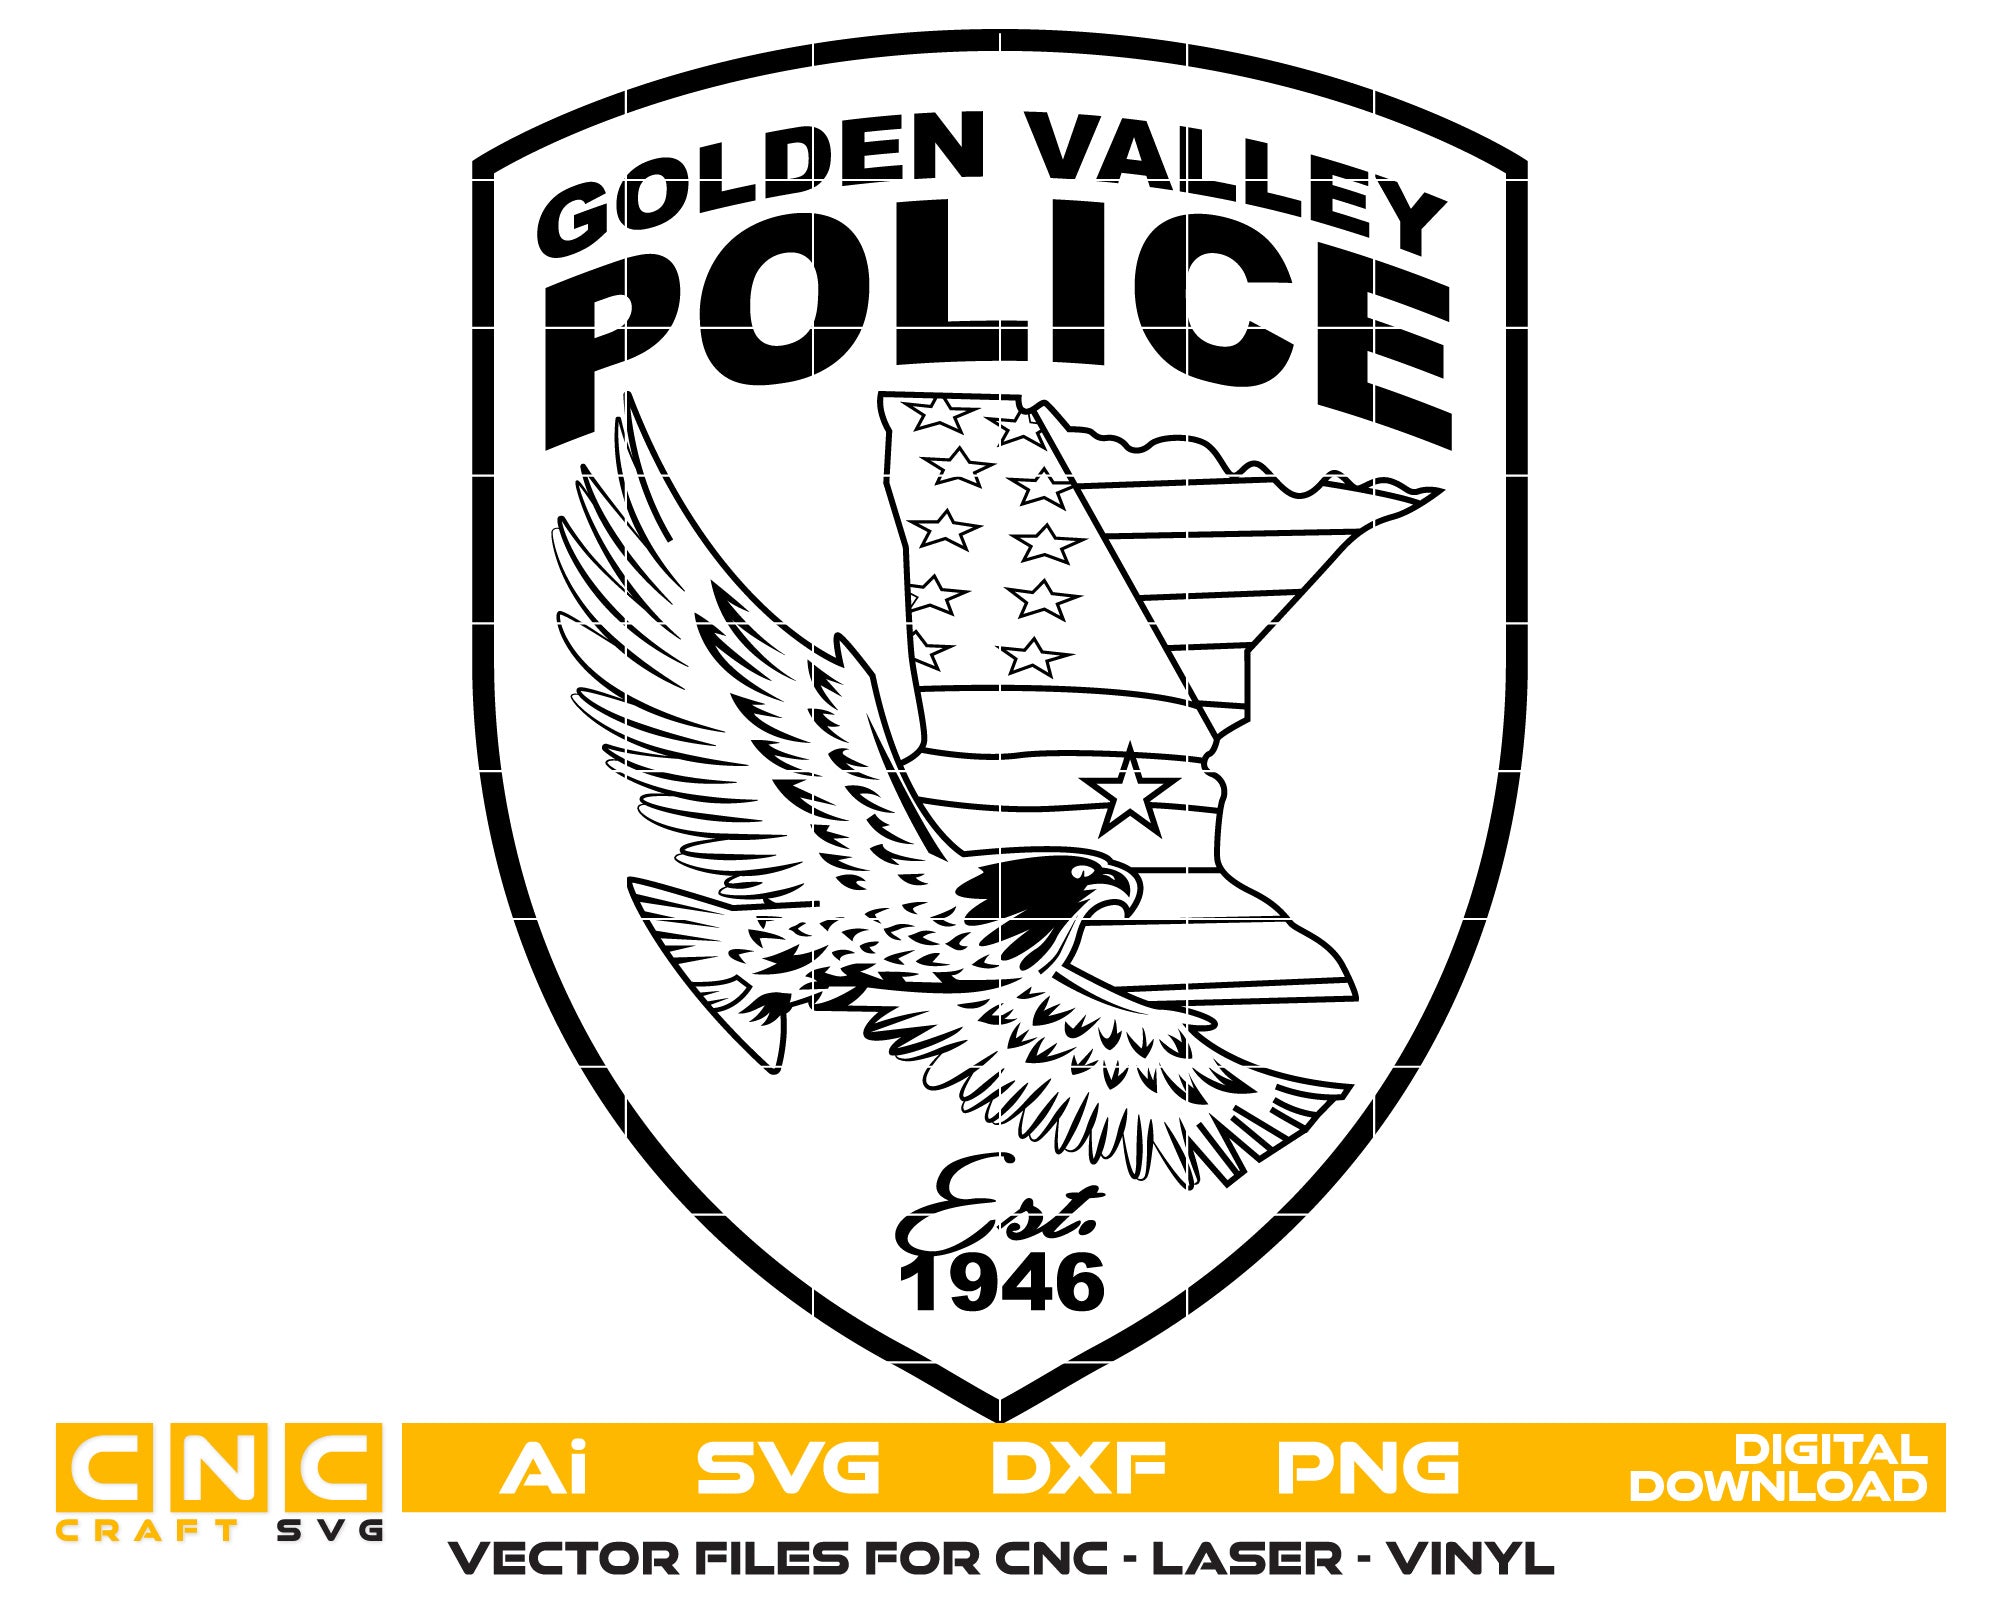 Golden valley police Vector Art, Ai,SVG, DXF, PNG, Digital Files